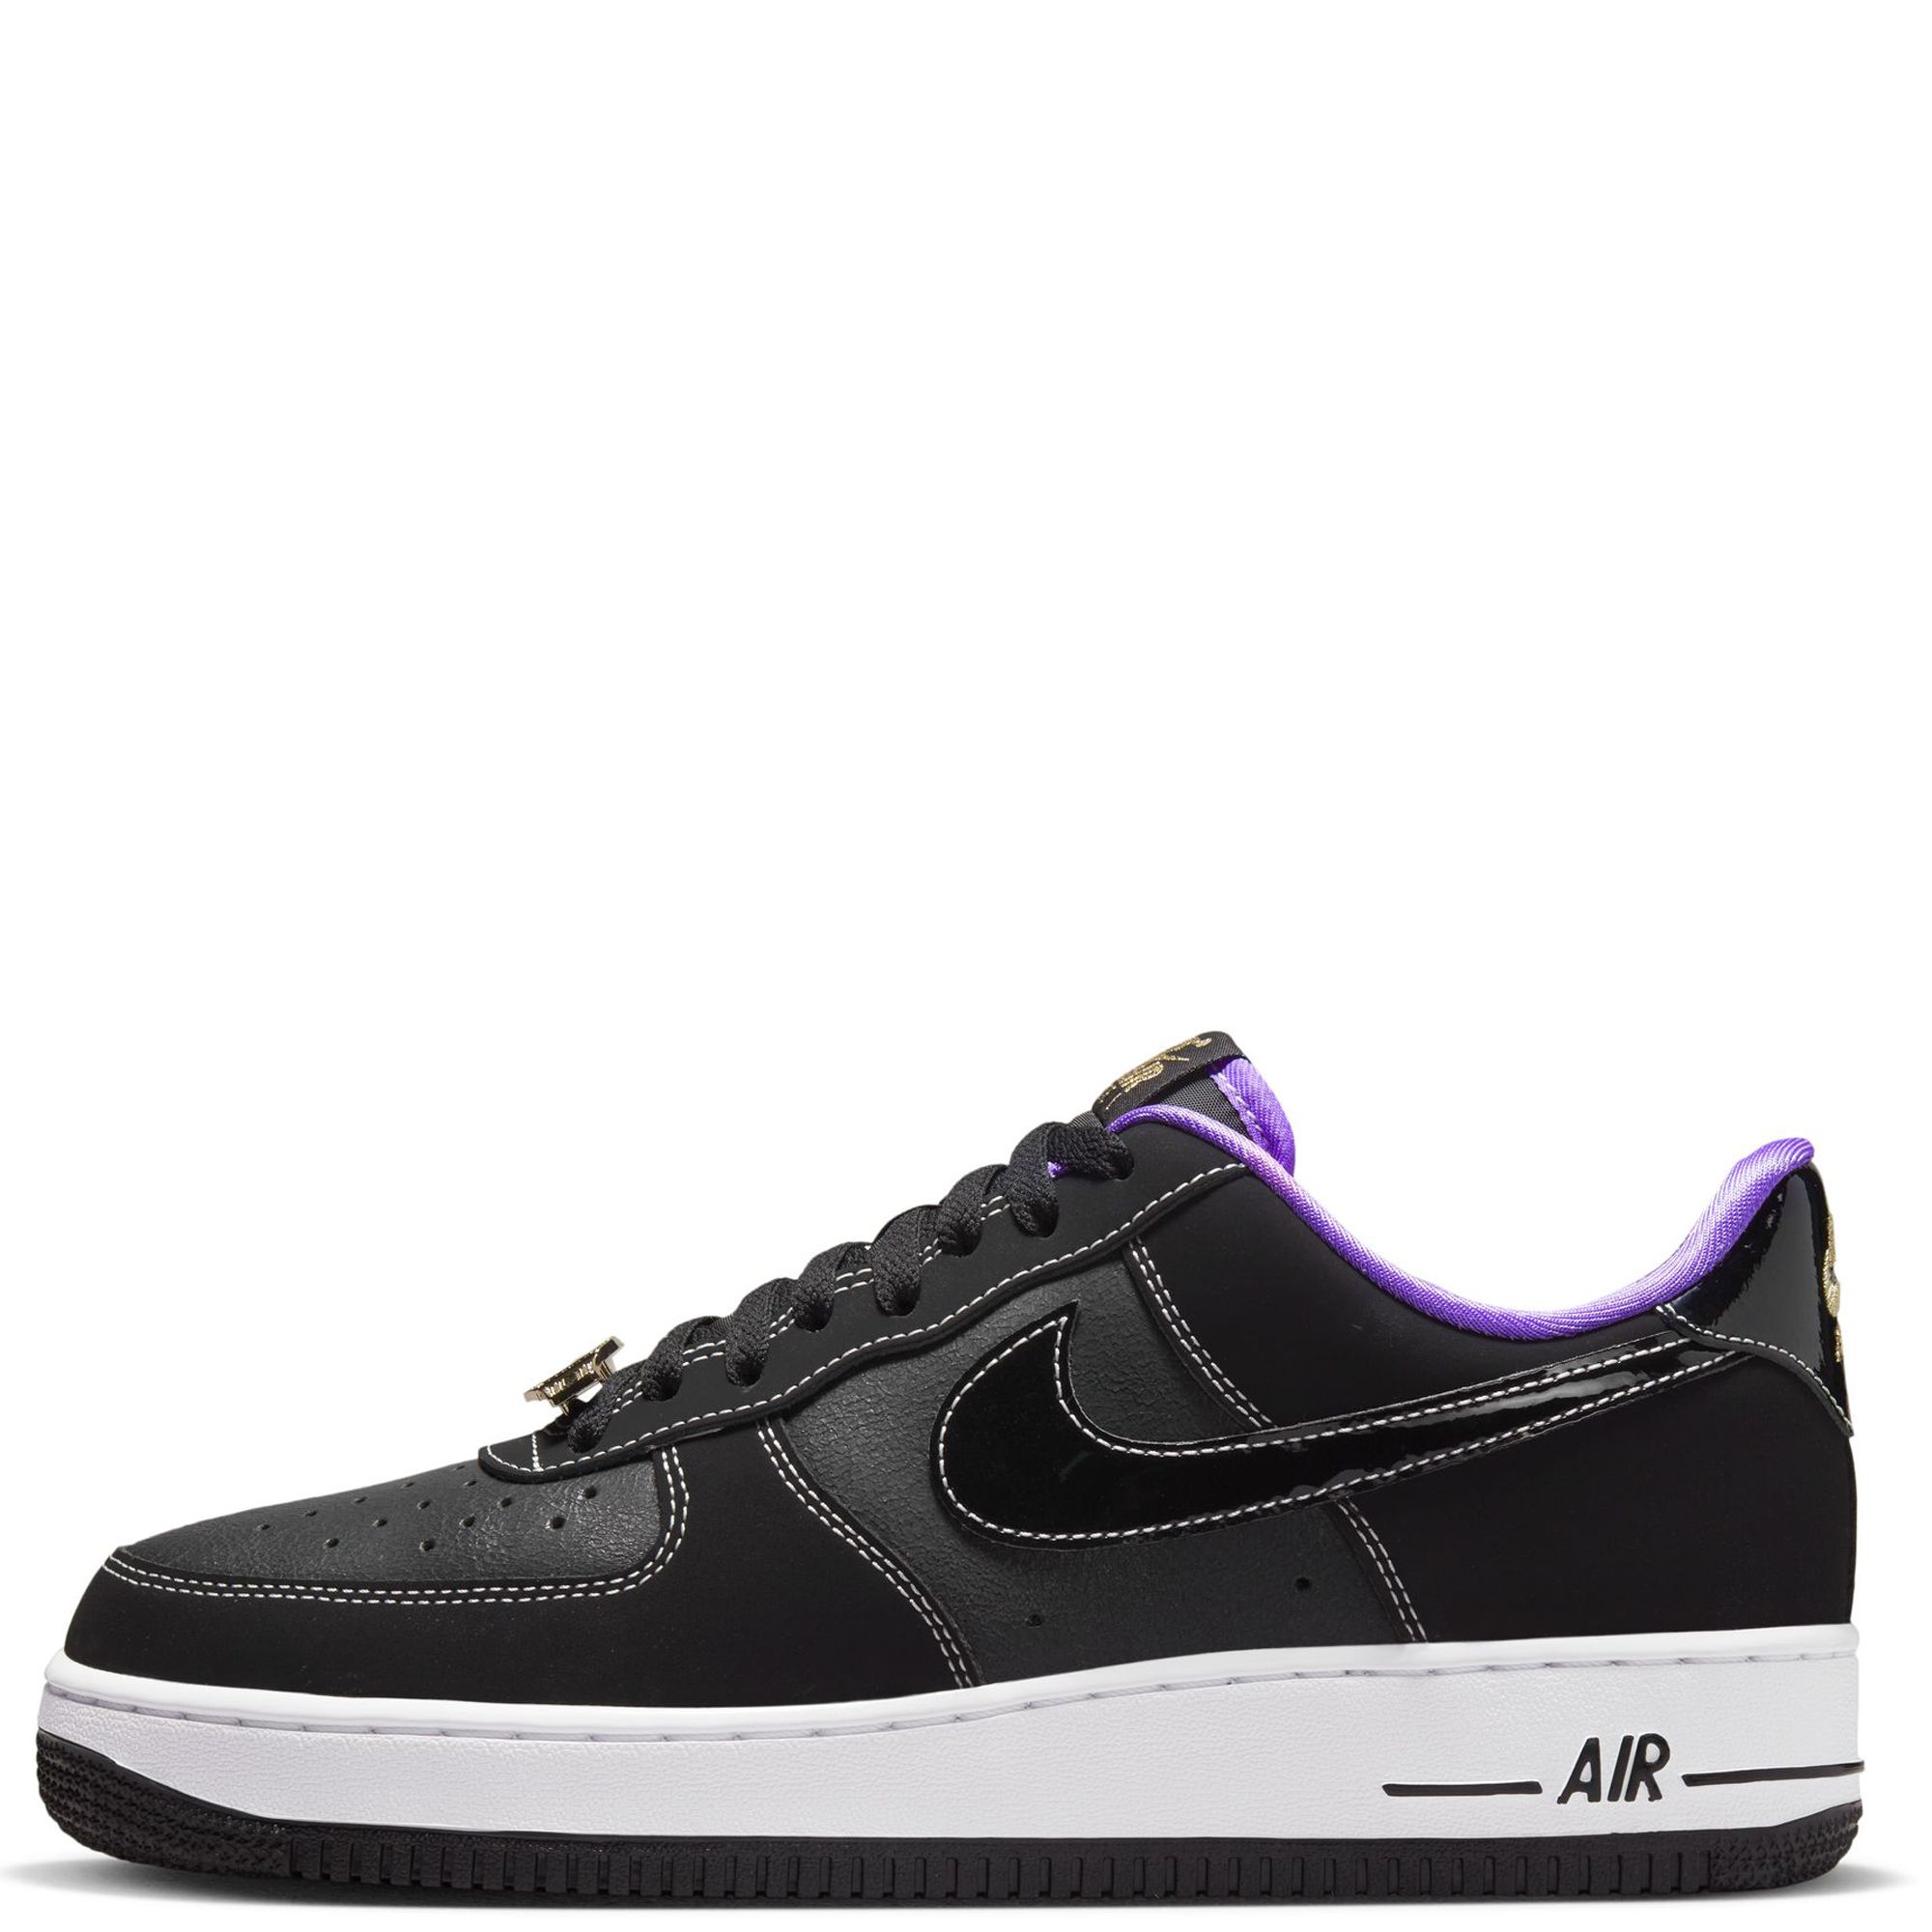 Nike Men's Air Force 1 '07 LV8 Shoes in Black, Size: 11 | Dr9866-001